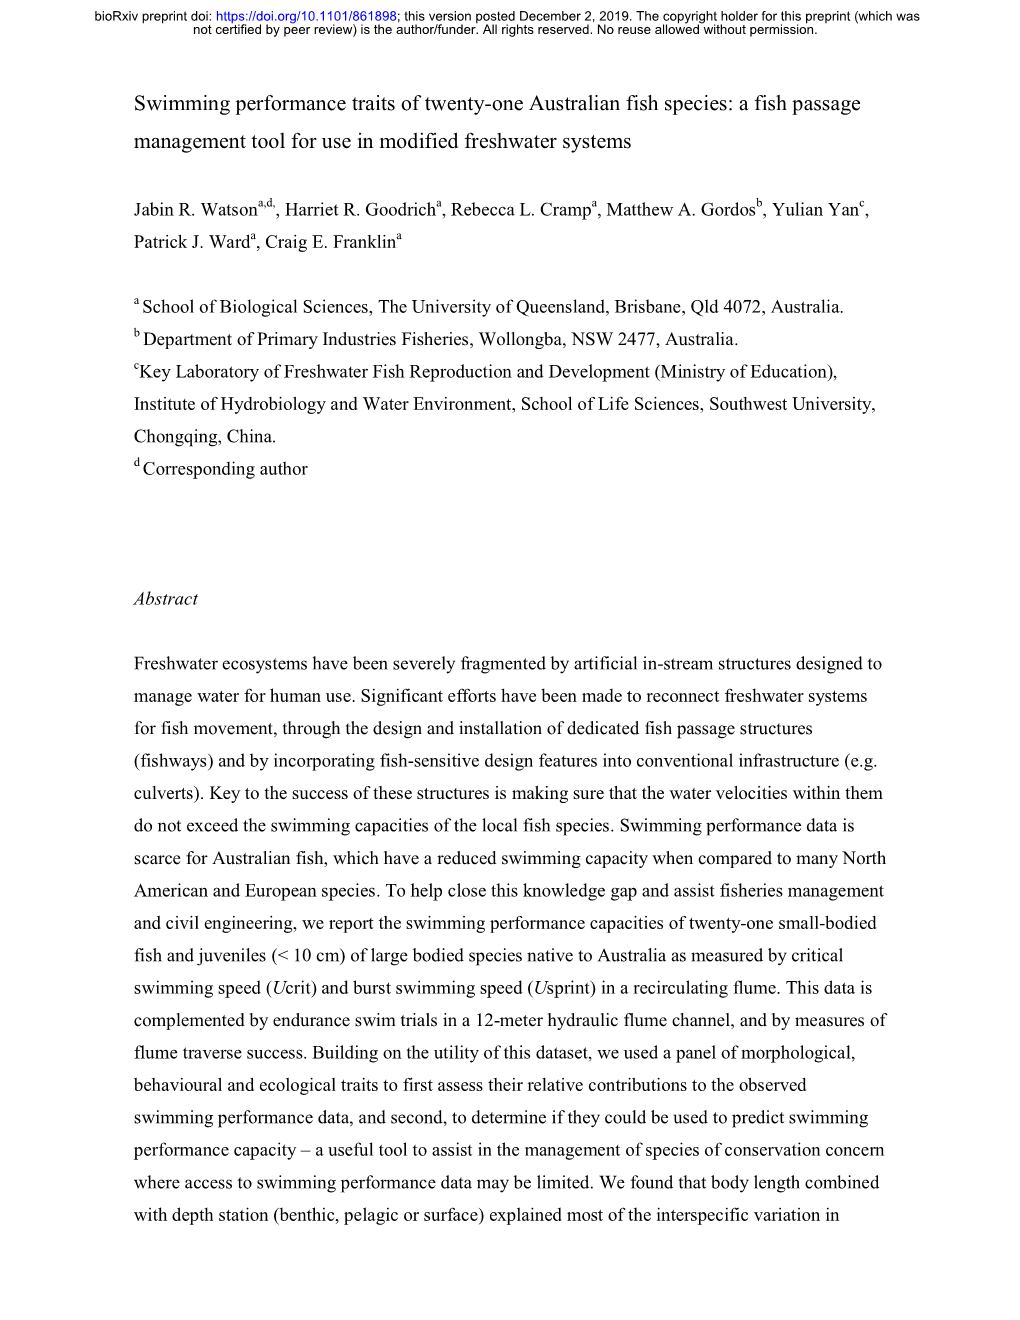 Swimming Performance Traits of Twenty-One Australian Fish Species: a Fish Passage Management Tool for Use in Modified Freshwater Systems